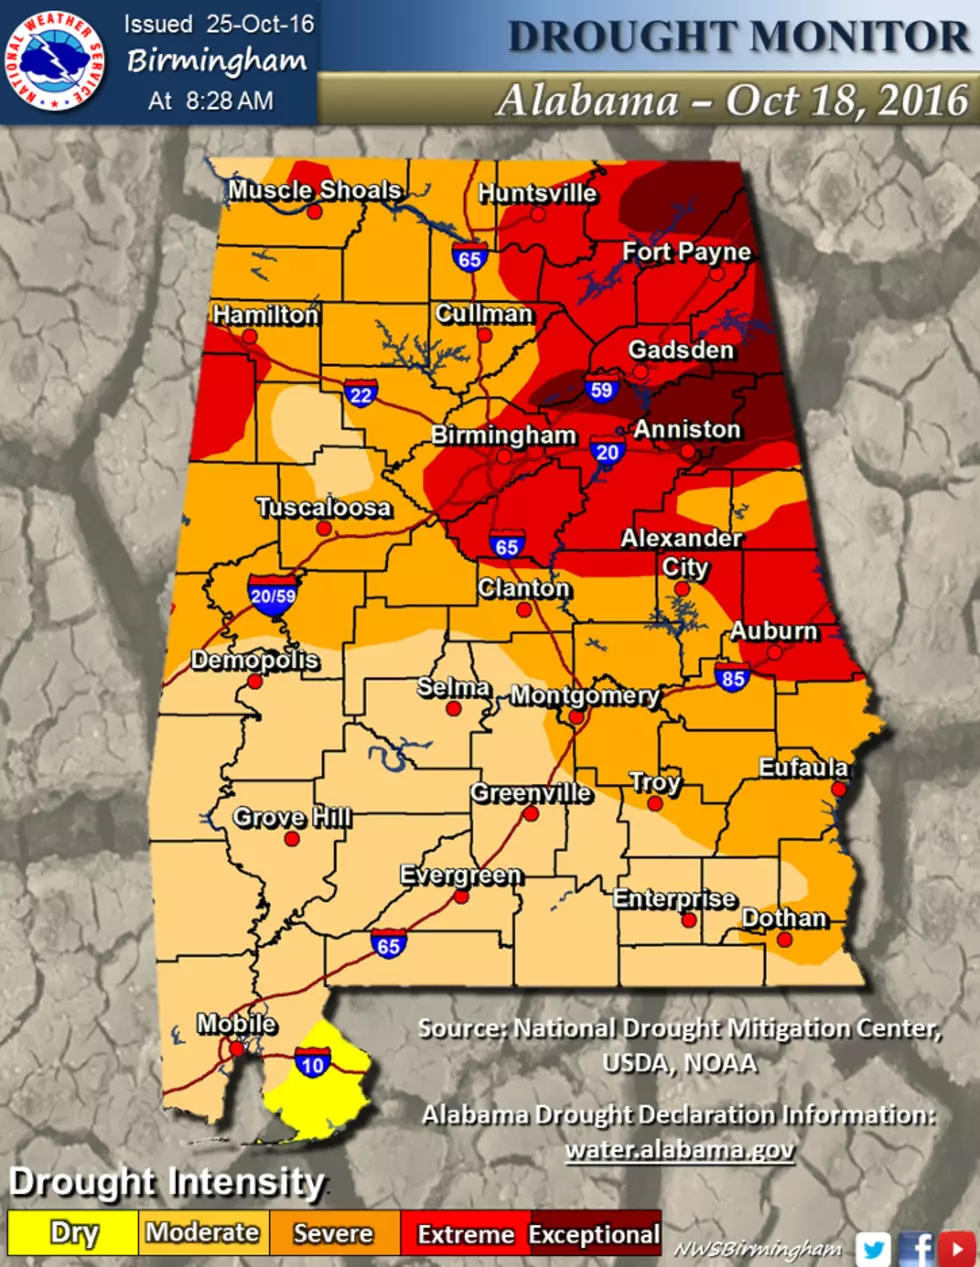 Severe Drought Conditions Continue In Tuscaloosa County and Across the State of Alabama